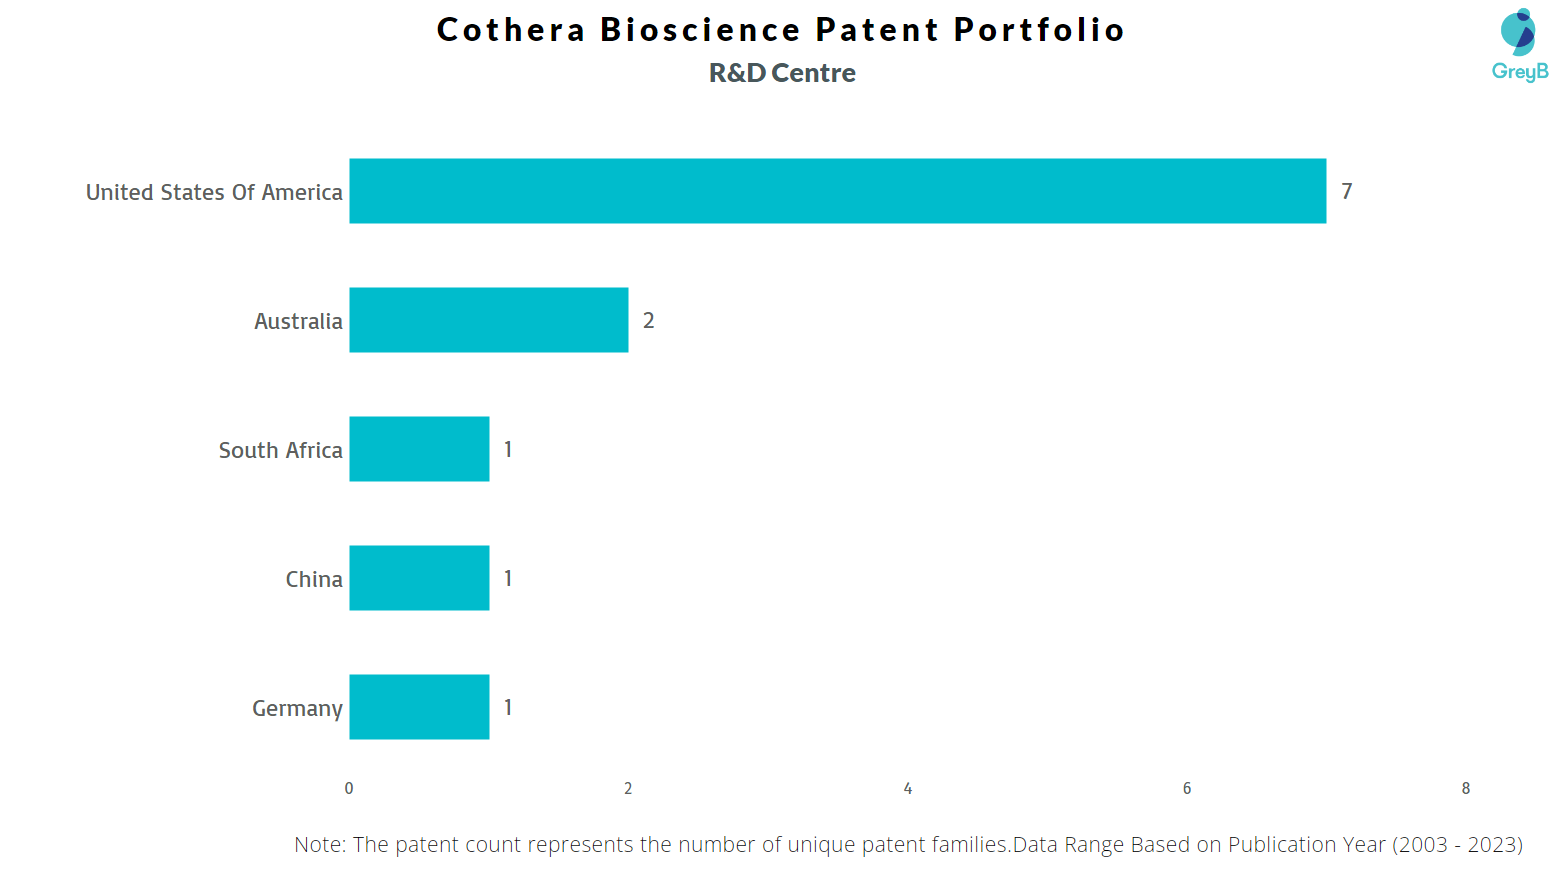 R&D Centres of Cothera Bioscience